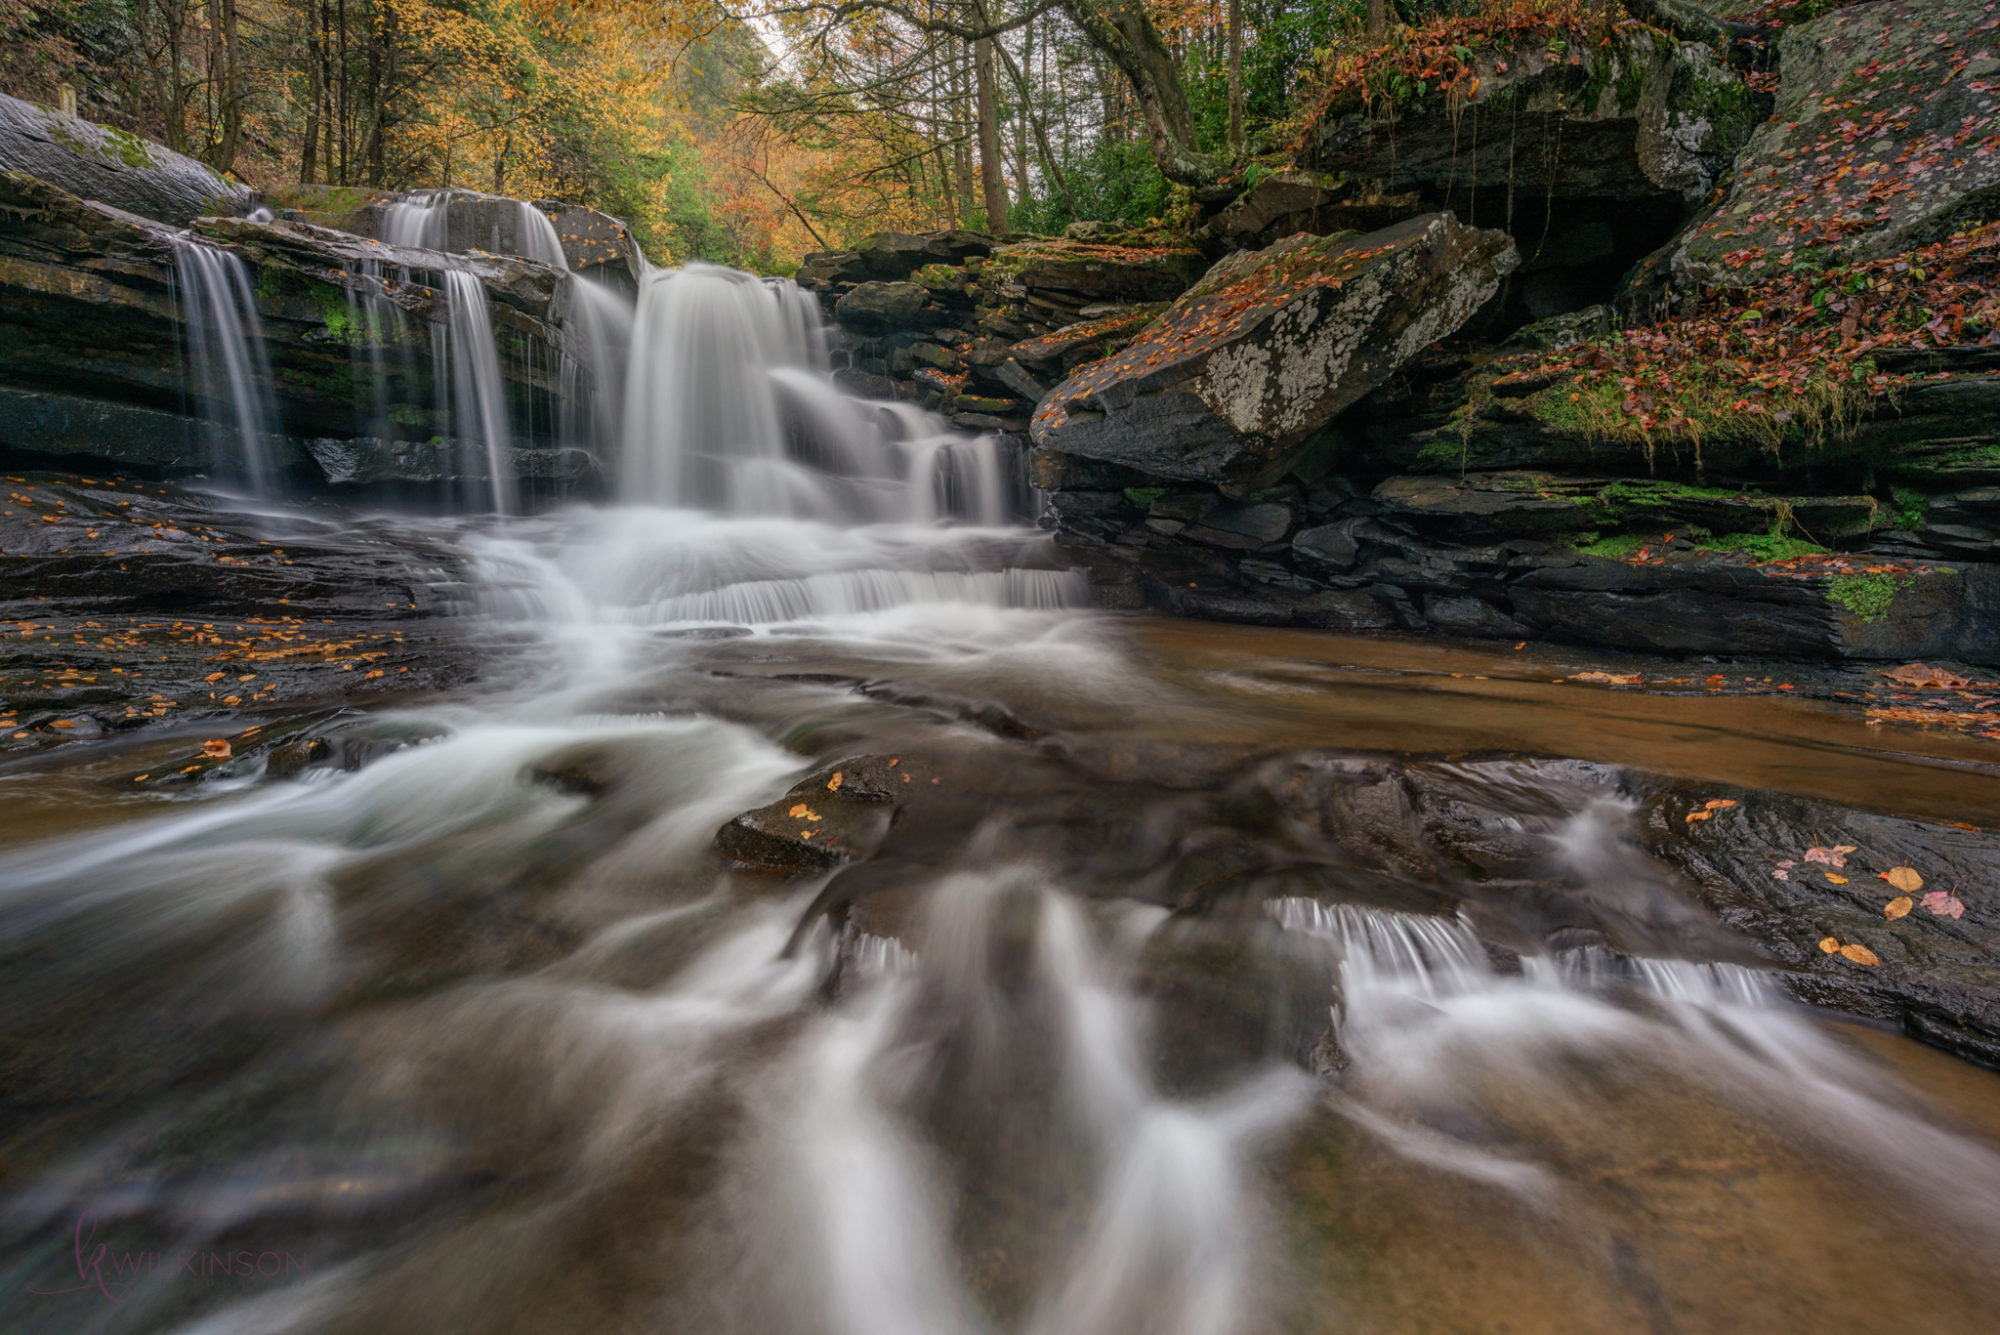 How to Find really good photo spots, tips shared on top US travel photography blog, Shannon Shipman:  Dunloup Creek Falls